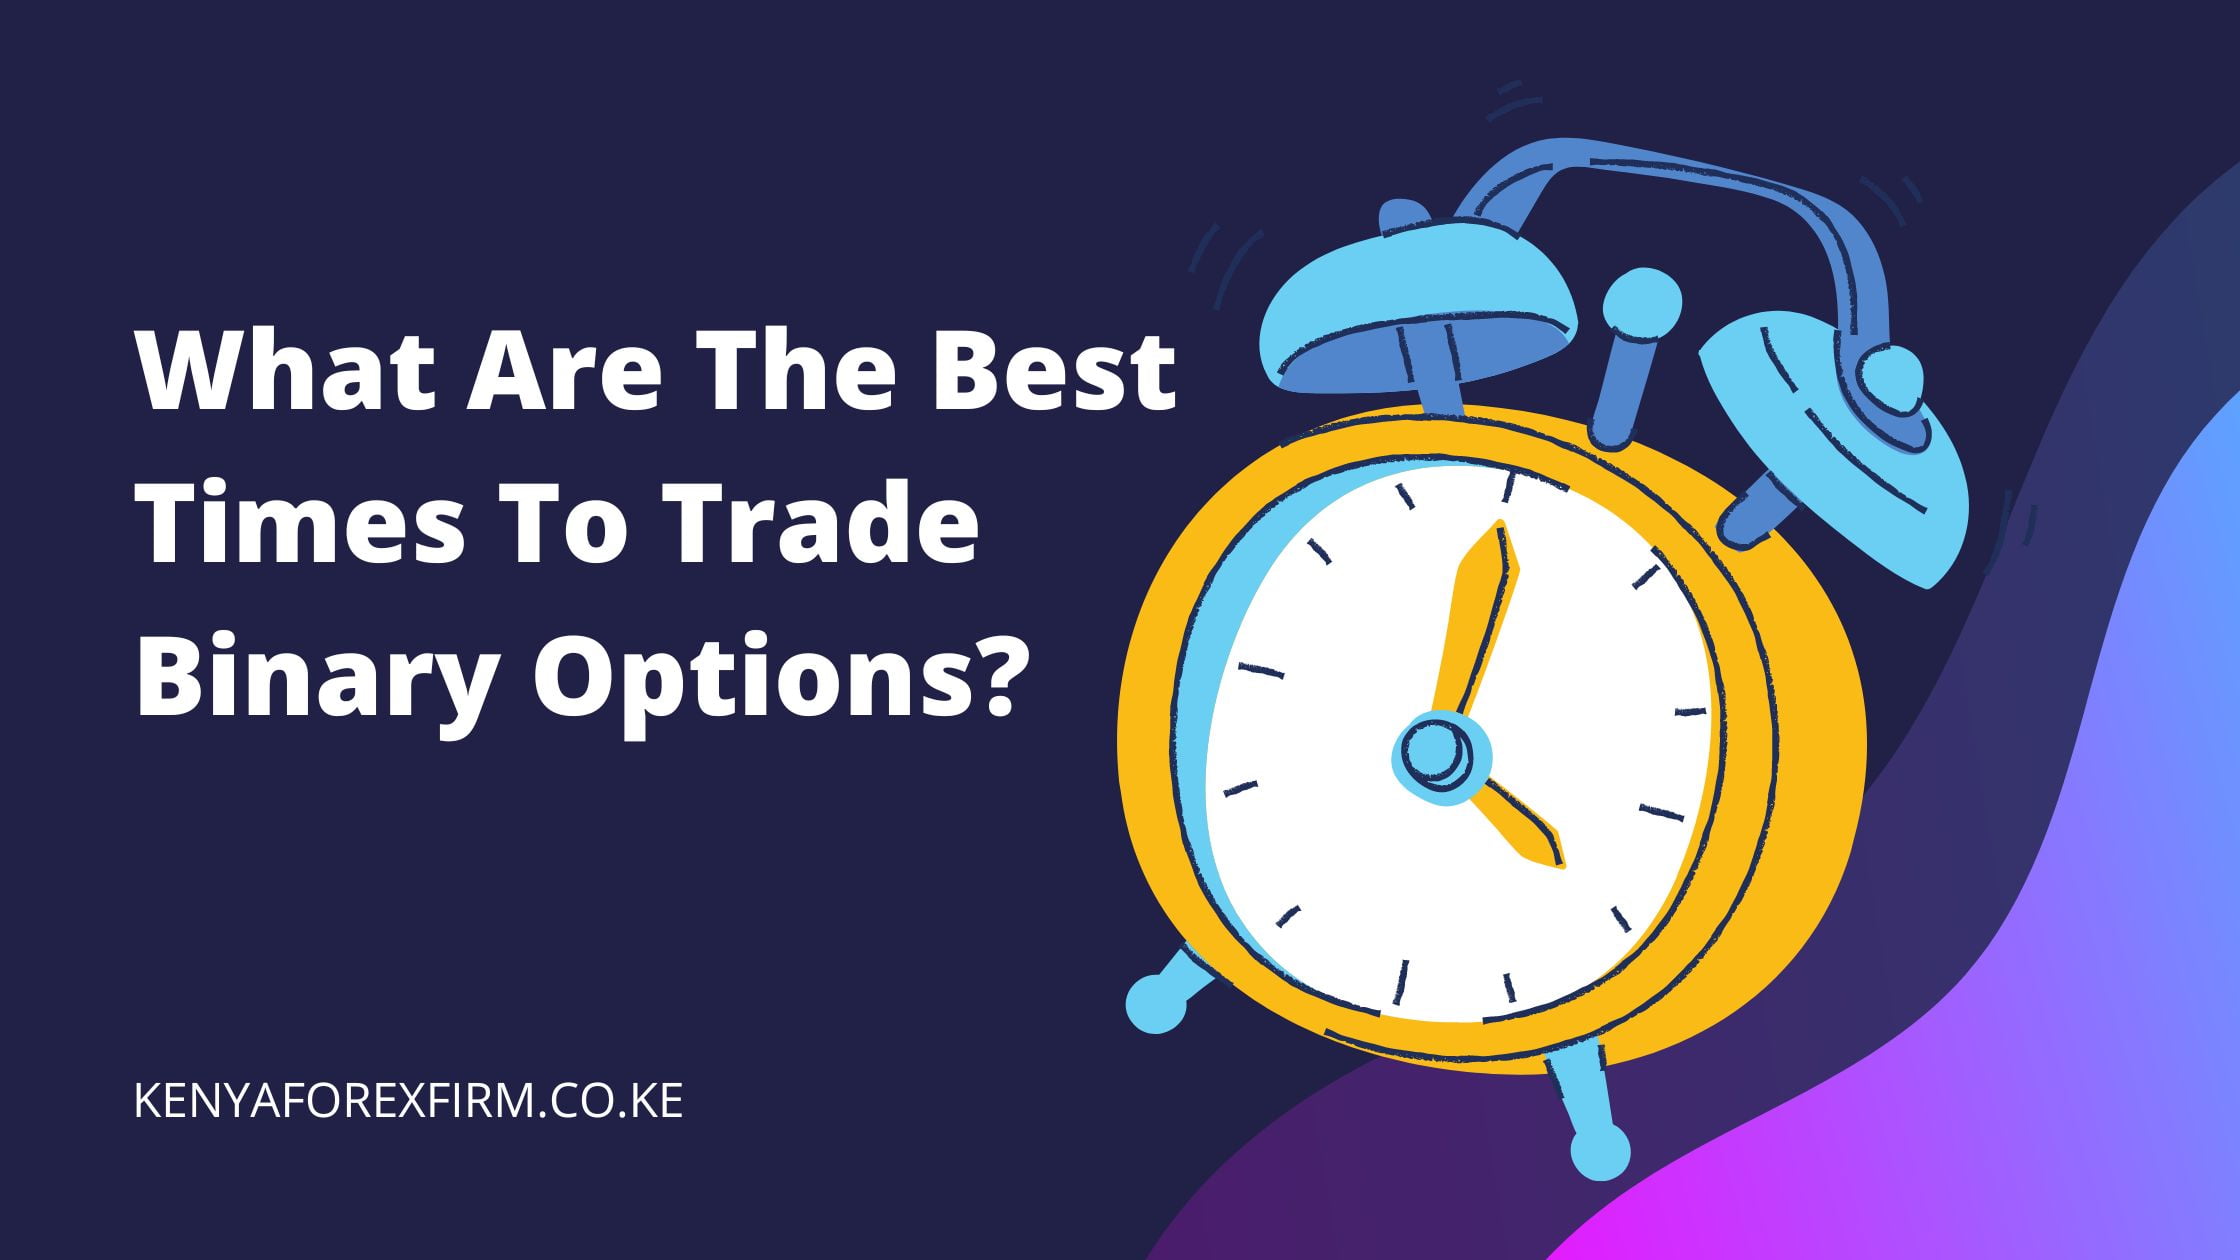 What Are The Best Times To Trade Binary Options?